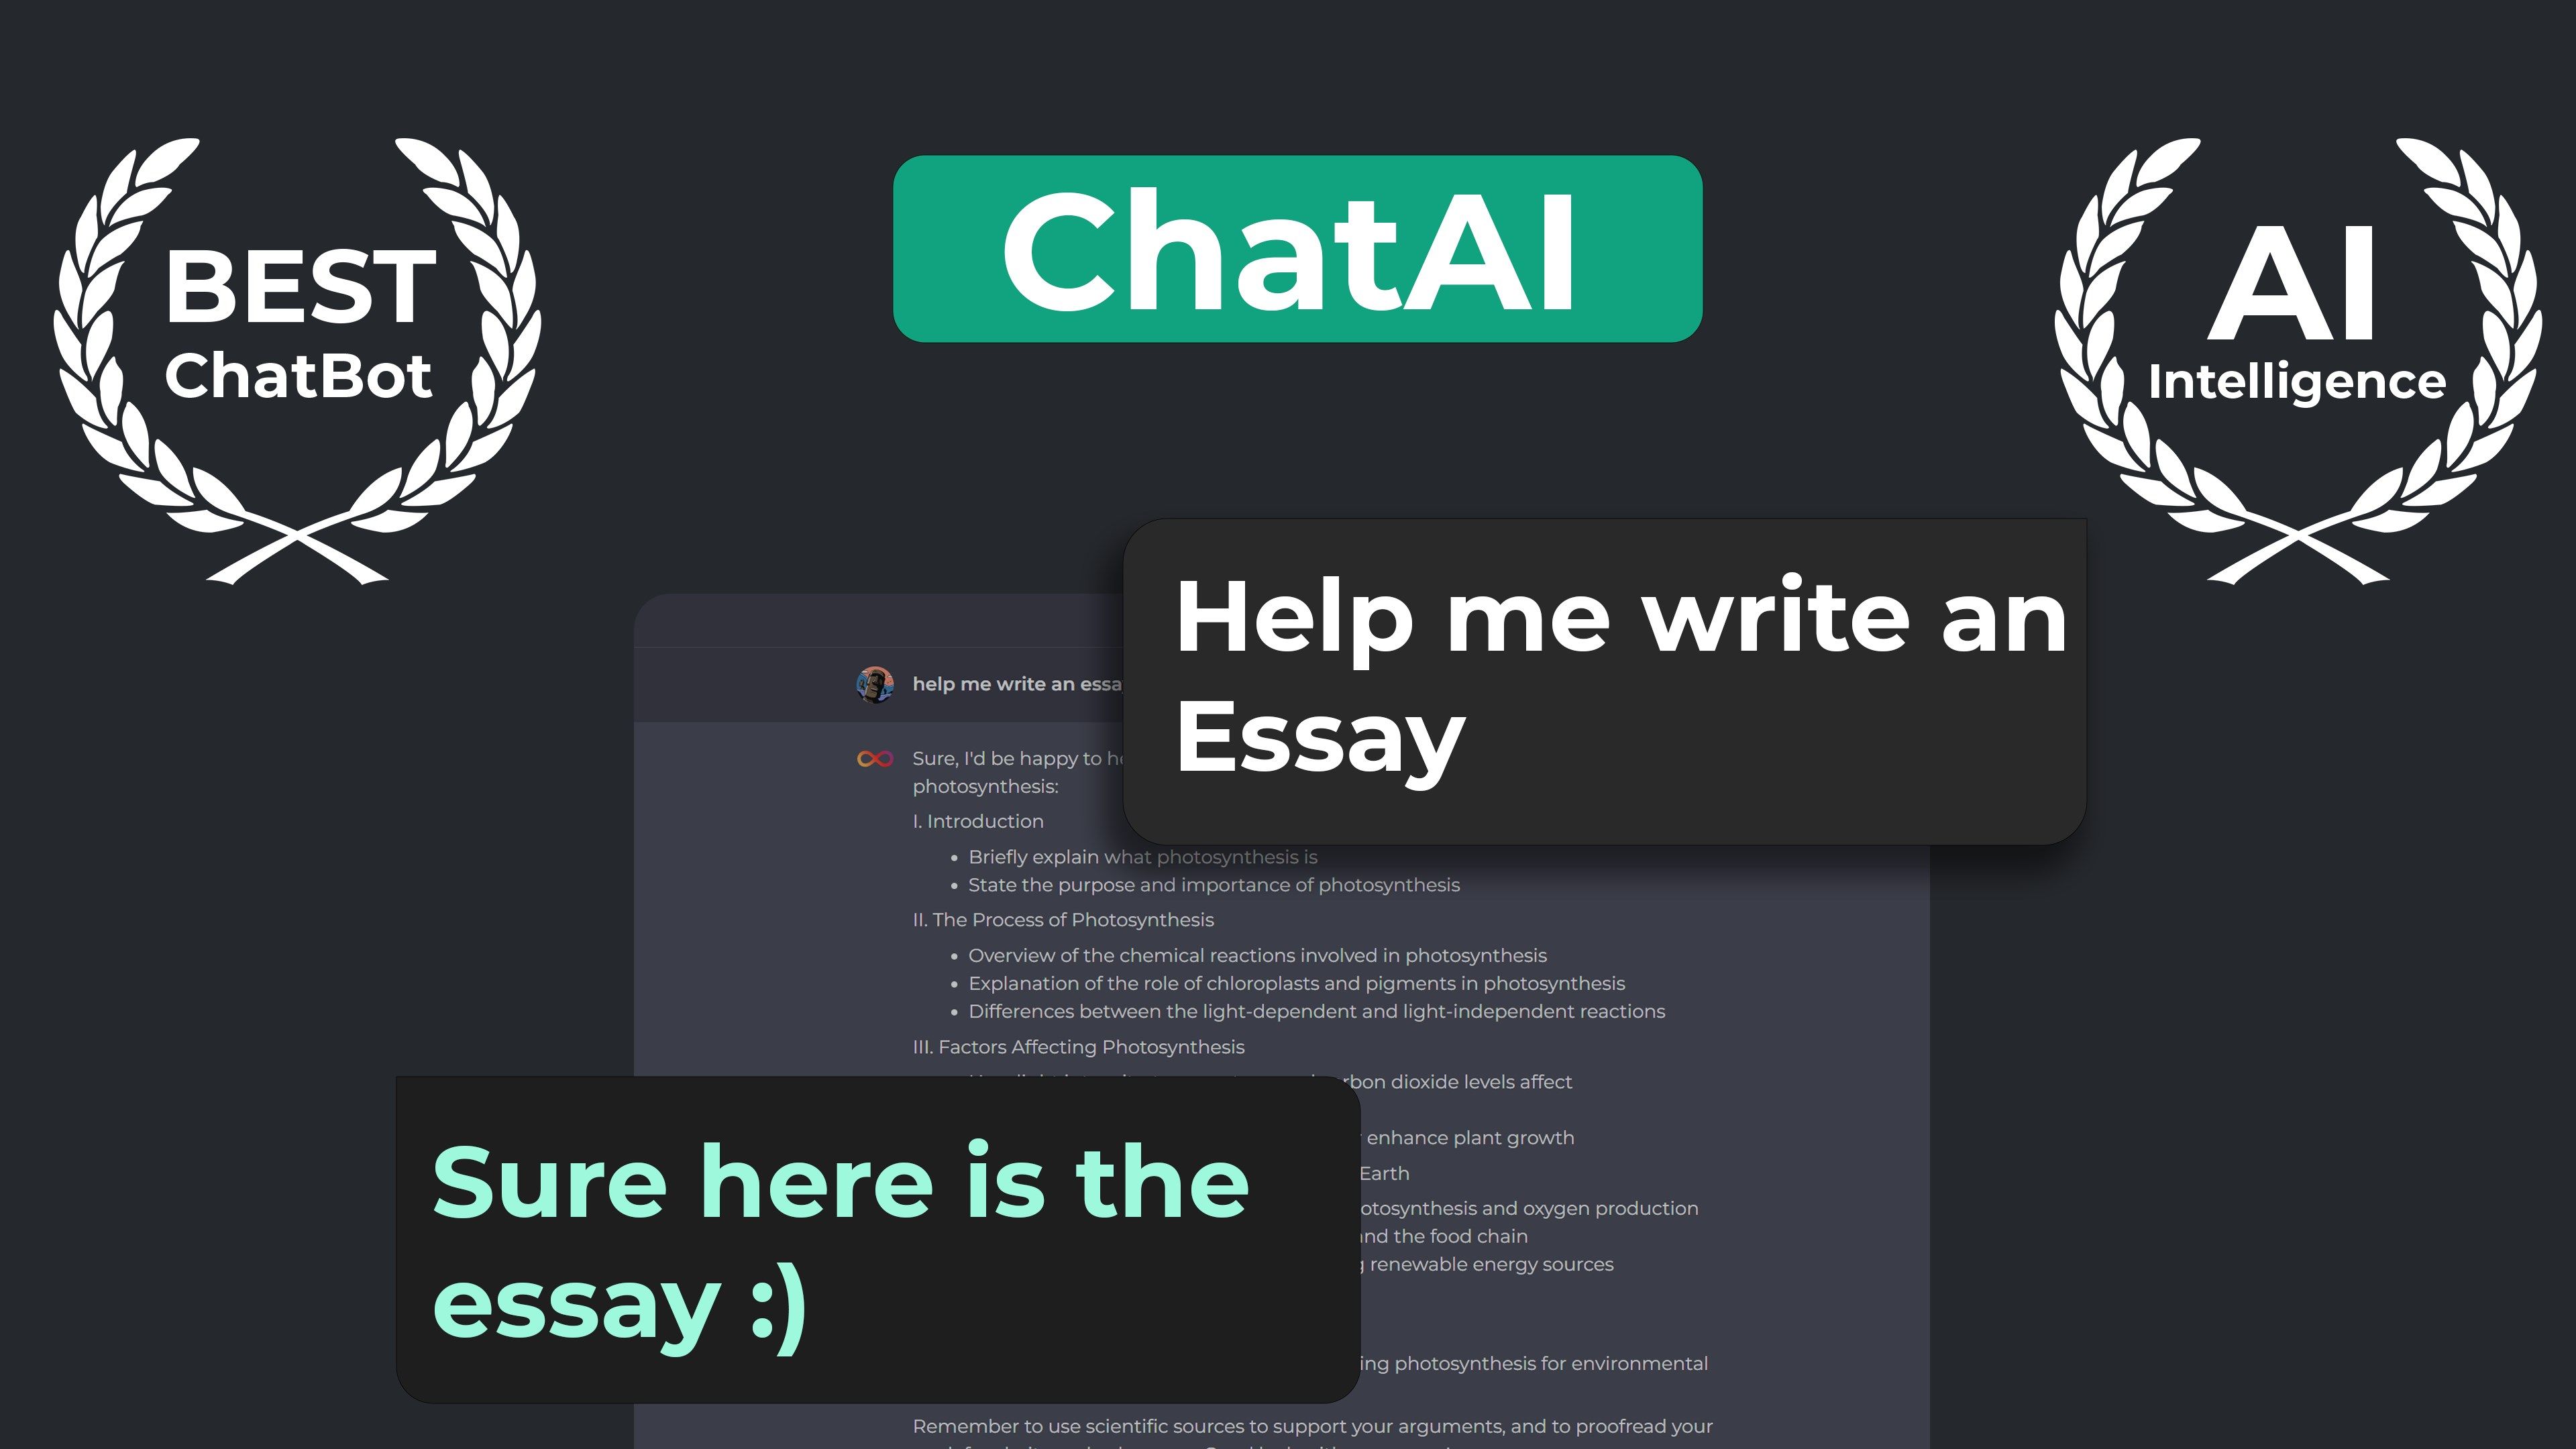 Chat AI Assistant - Ask Me Anything